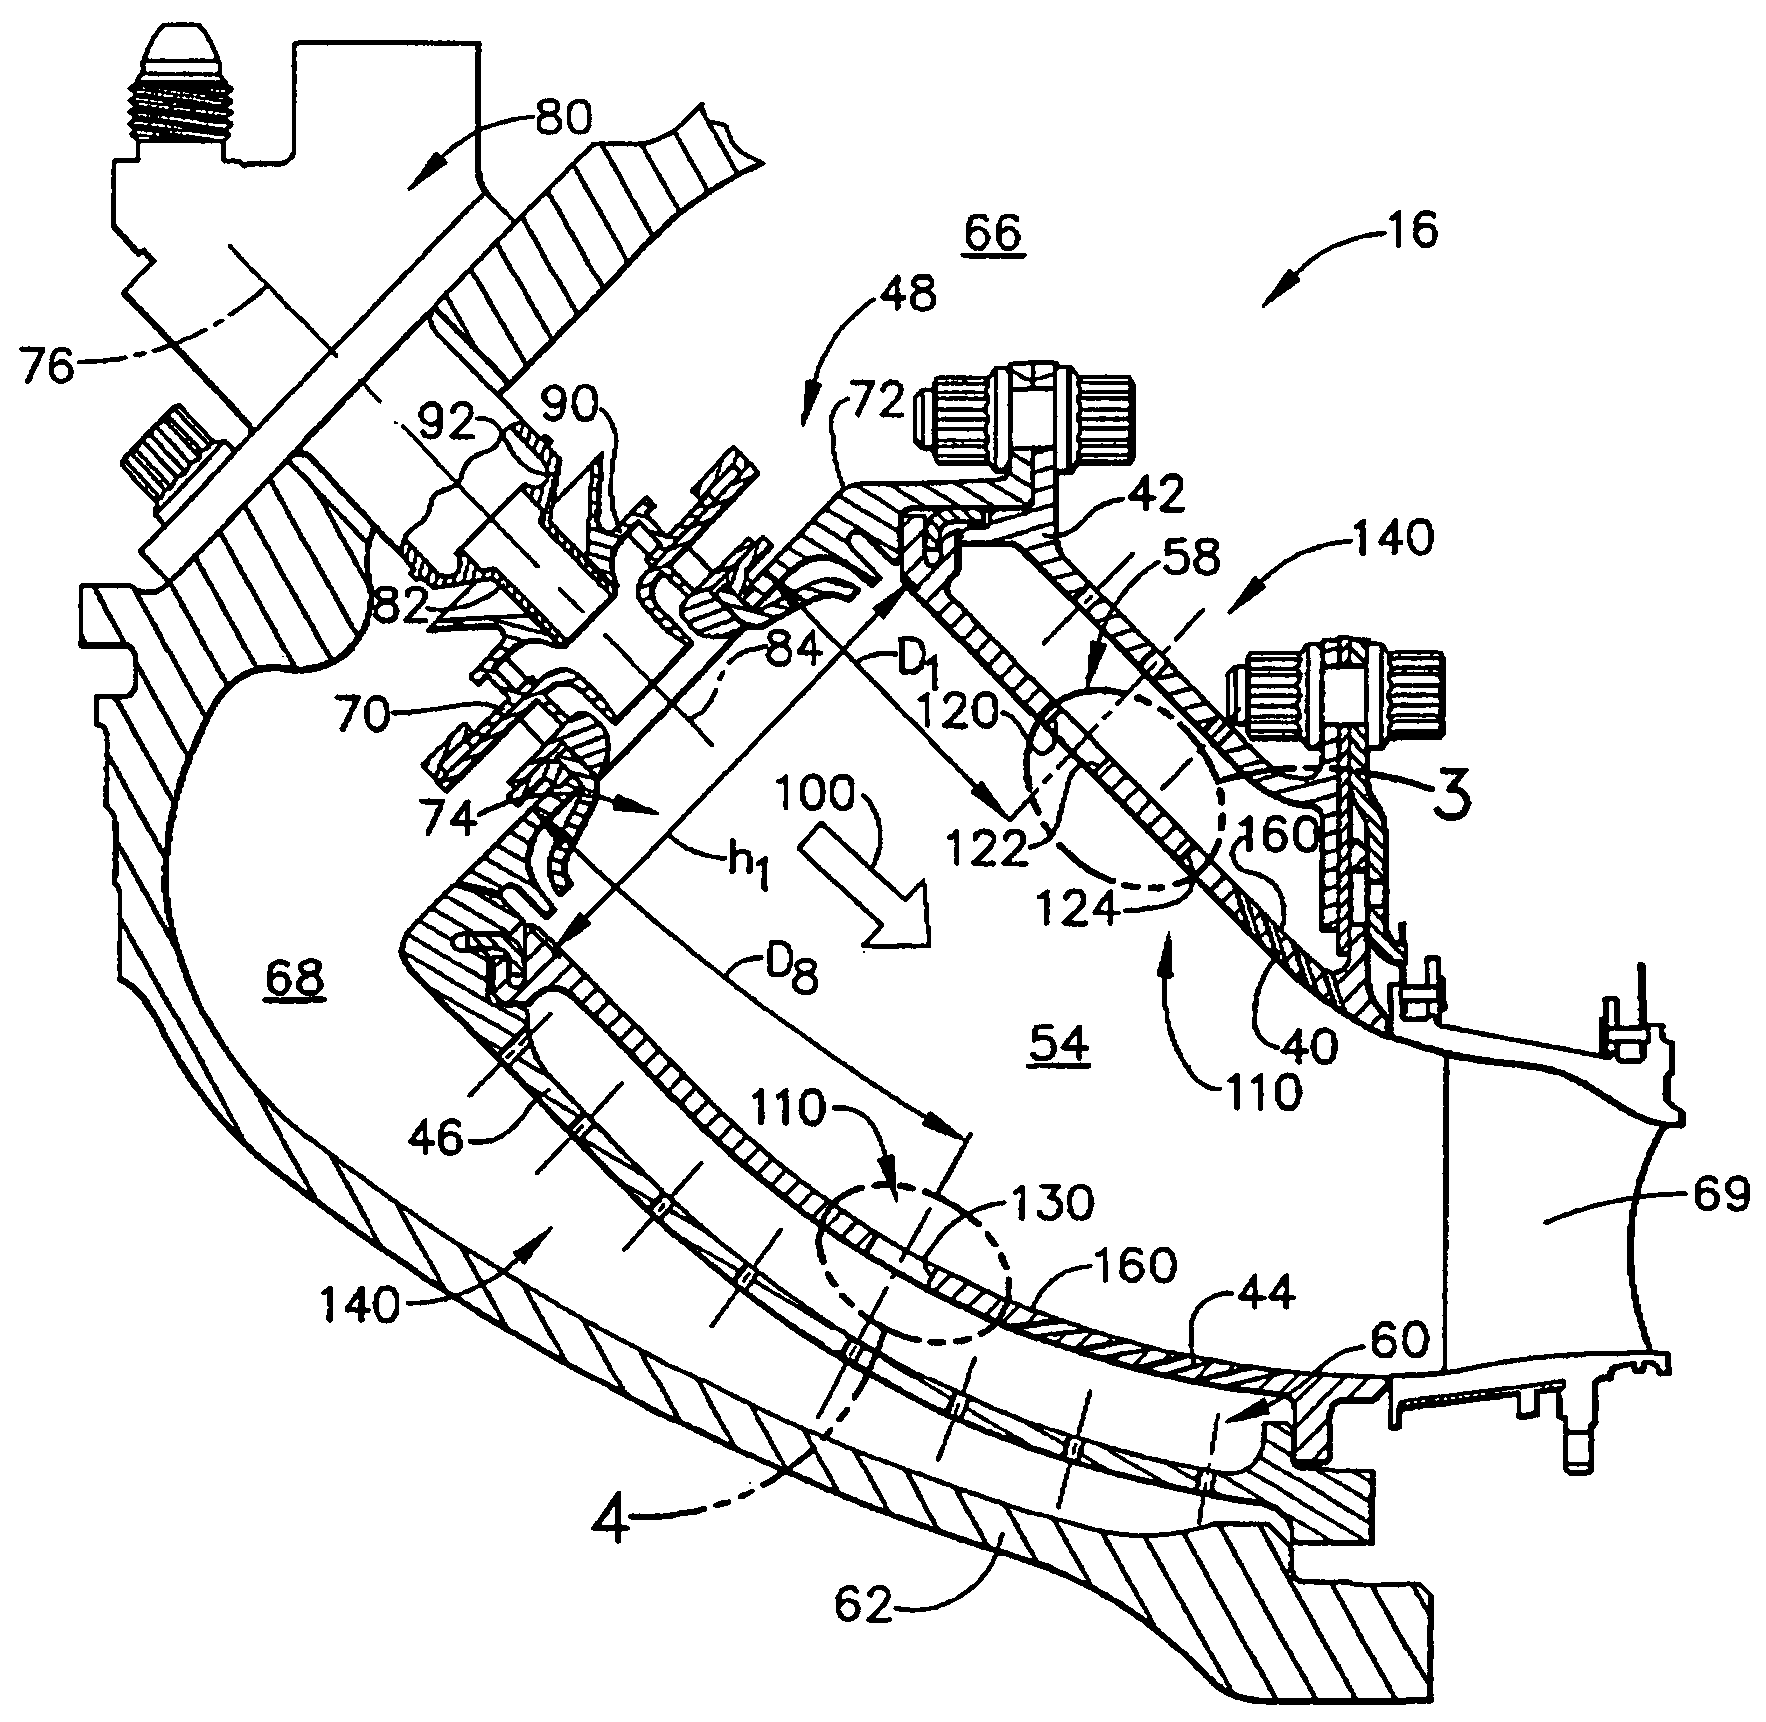 Methods and apparatus for cooling turbine engine combustor exit temperatures